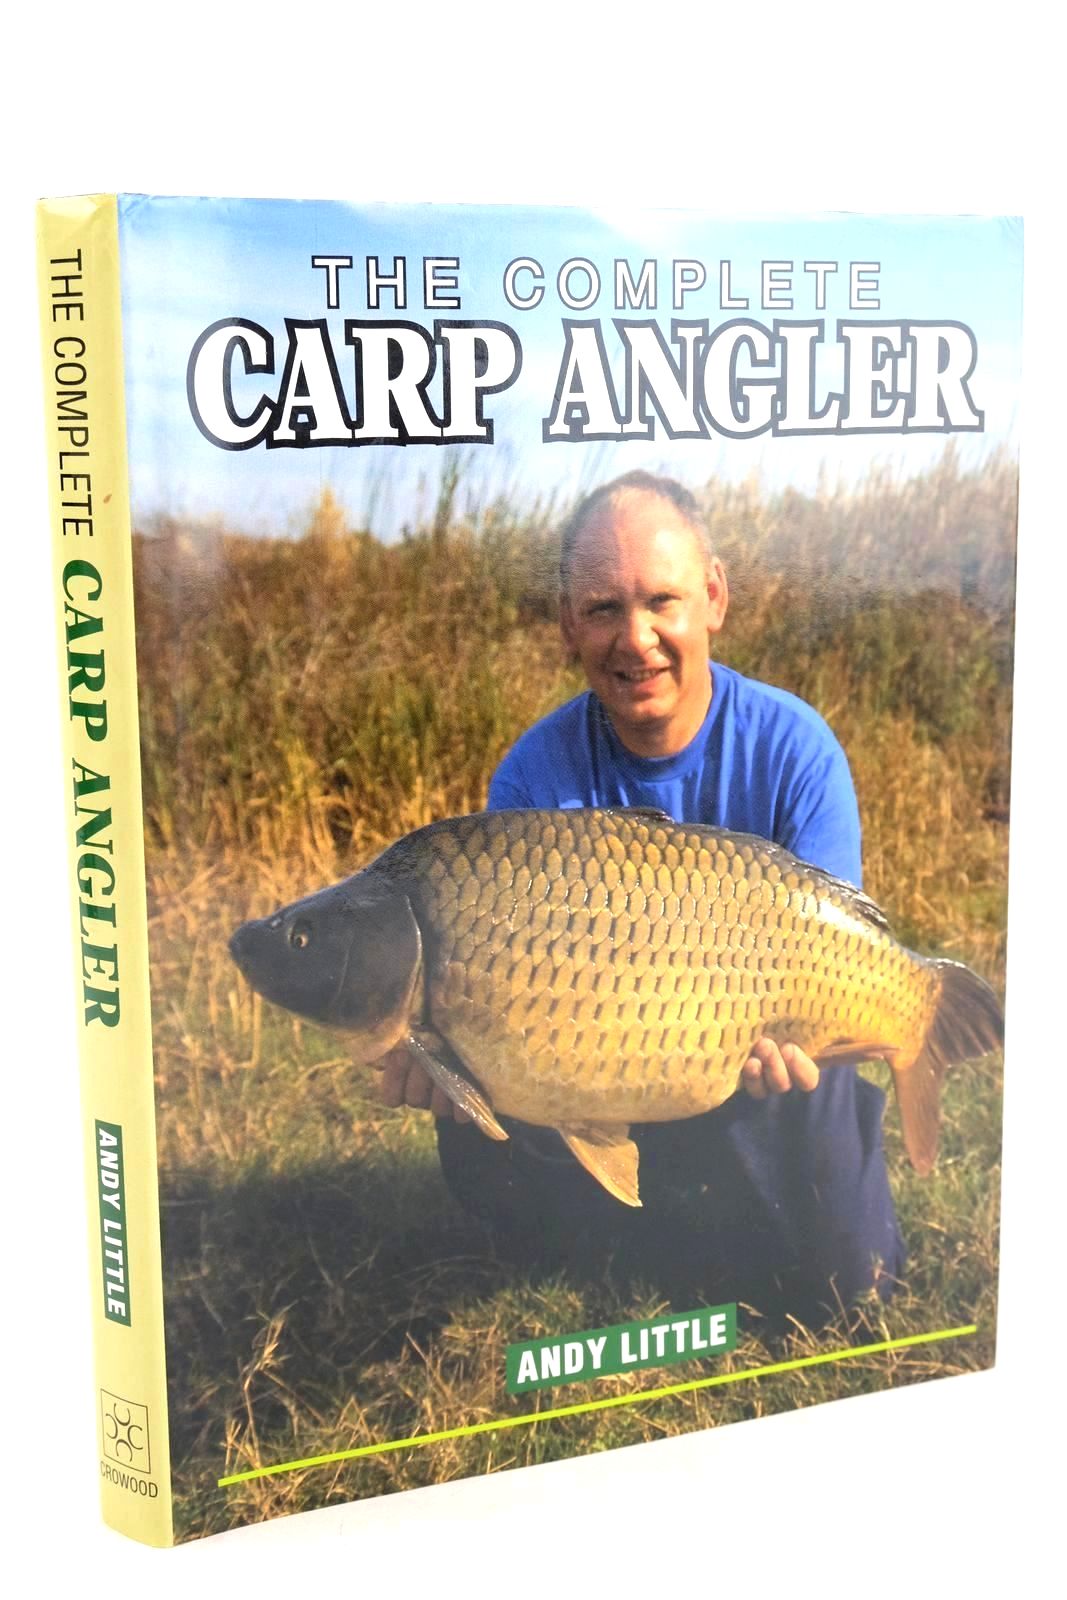 Photo of THE COMPLETE CARP ANGLER written by Little, Andy Wenczka, Jan Ball, Chris published by The Crowood Press (STOCK CODE: 1327501)  for sale by Stella & Rose's Books